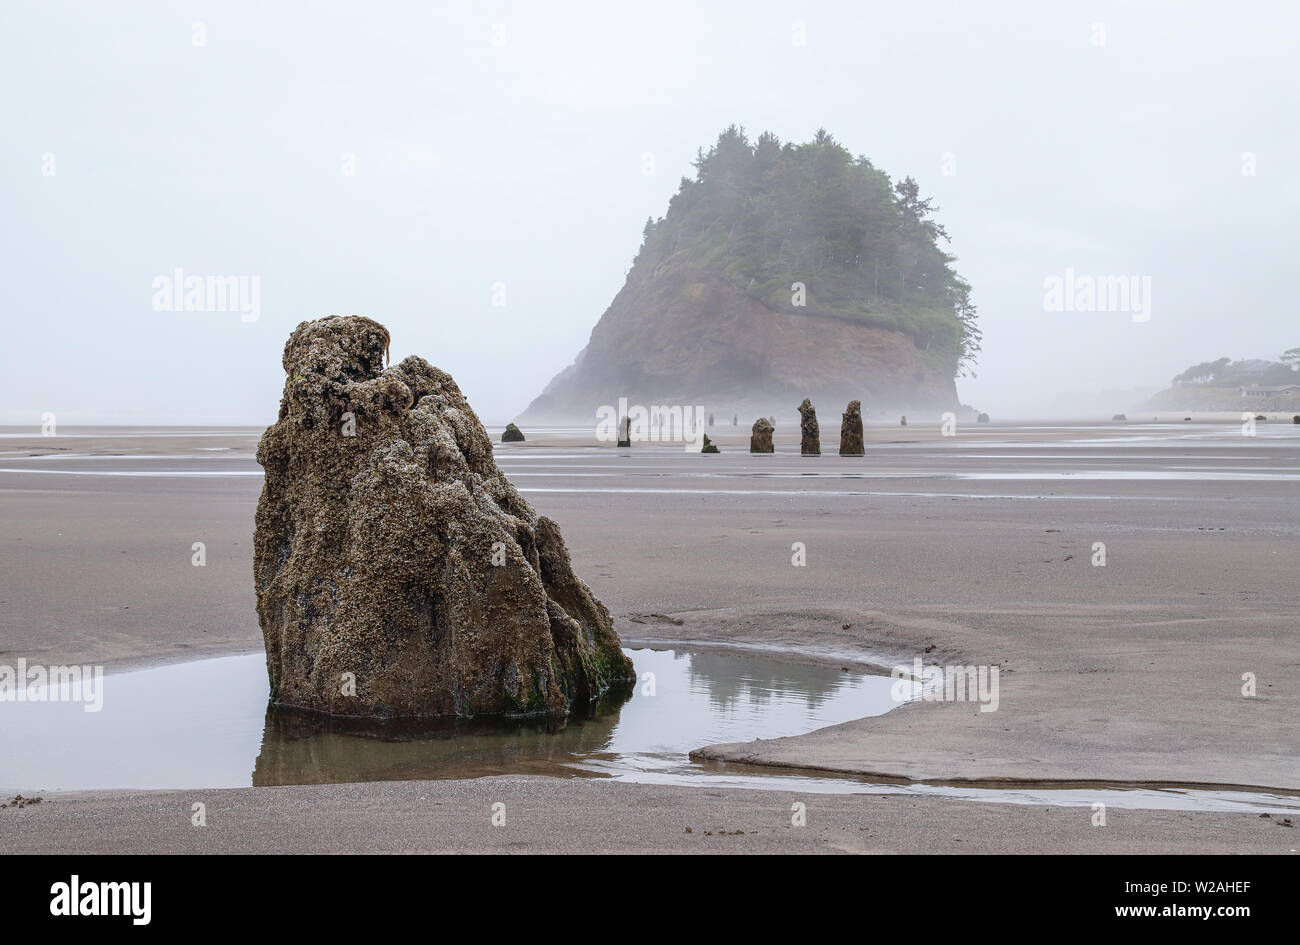 Neskowin, Oregon - The Neskowin Ghost Forest is a strange formation of petrified trees that have sunk below the surface level of the tide. Stock Photo